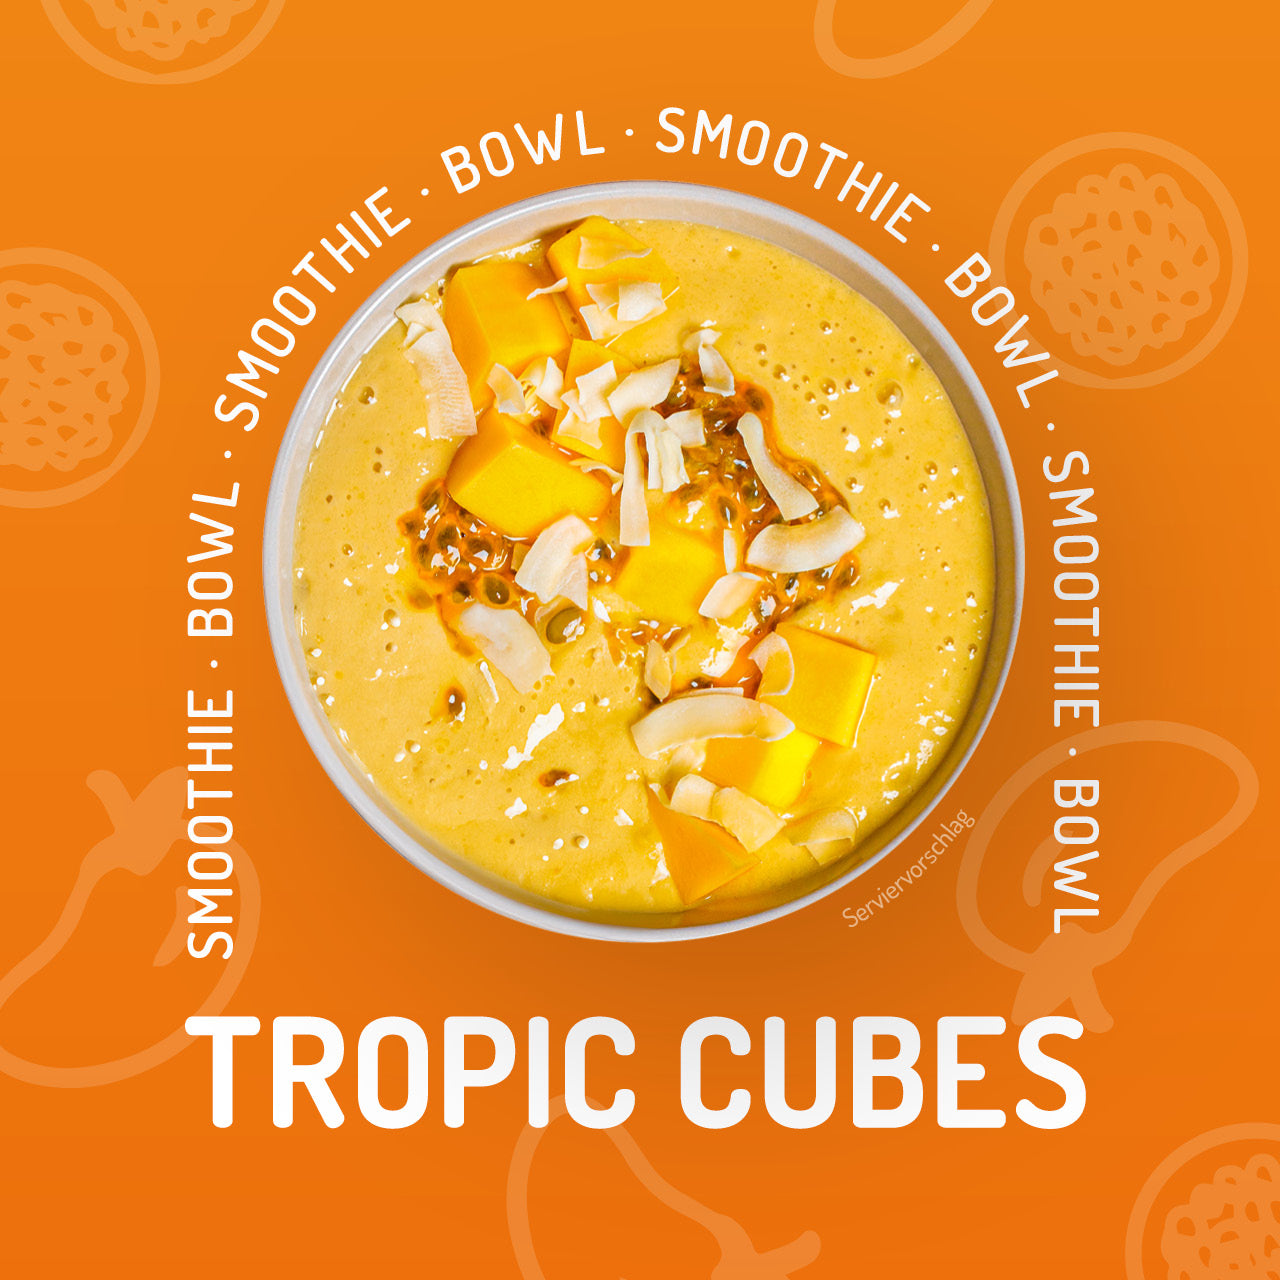 froobie - Smoothie Cubes Tropic